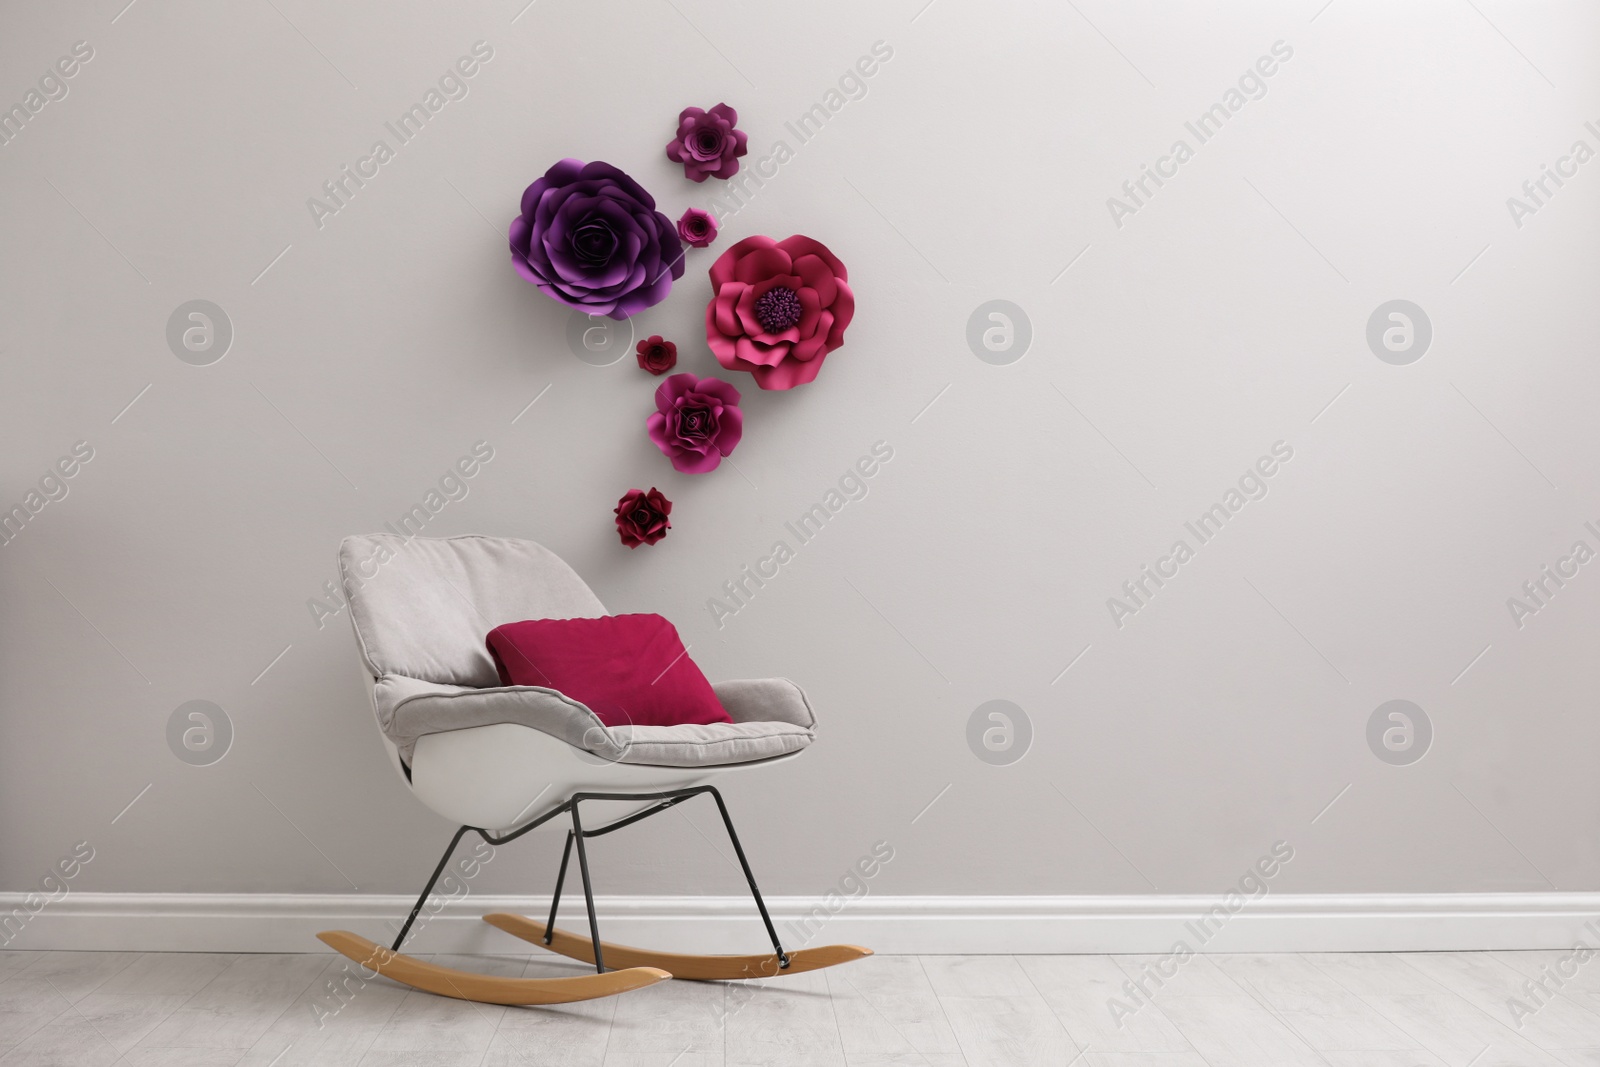 Photo of Stylish room interior with floral decor and rocking chair, space for text